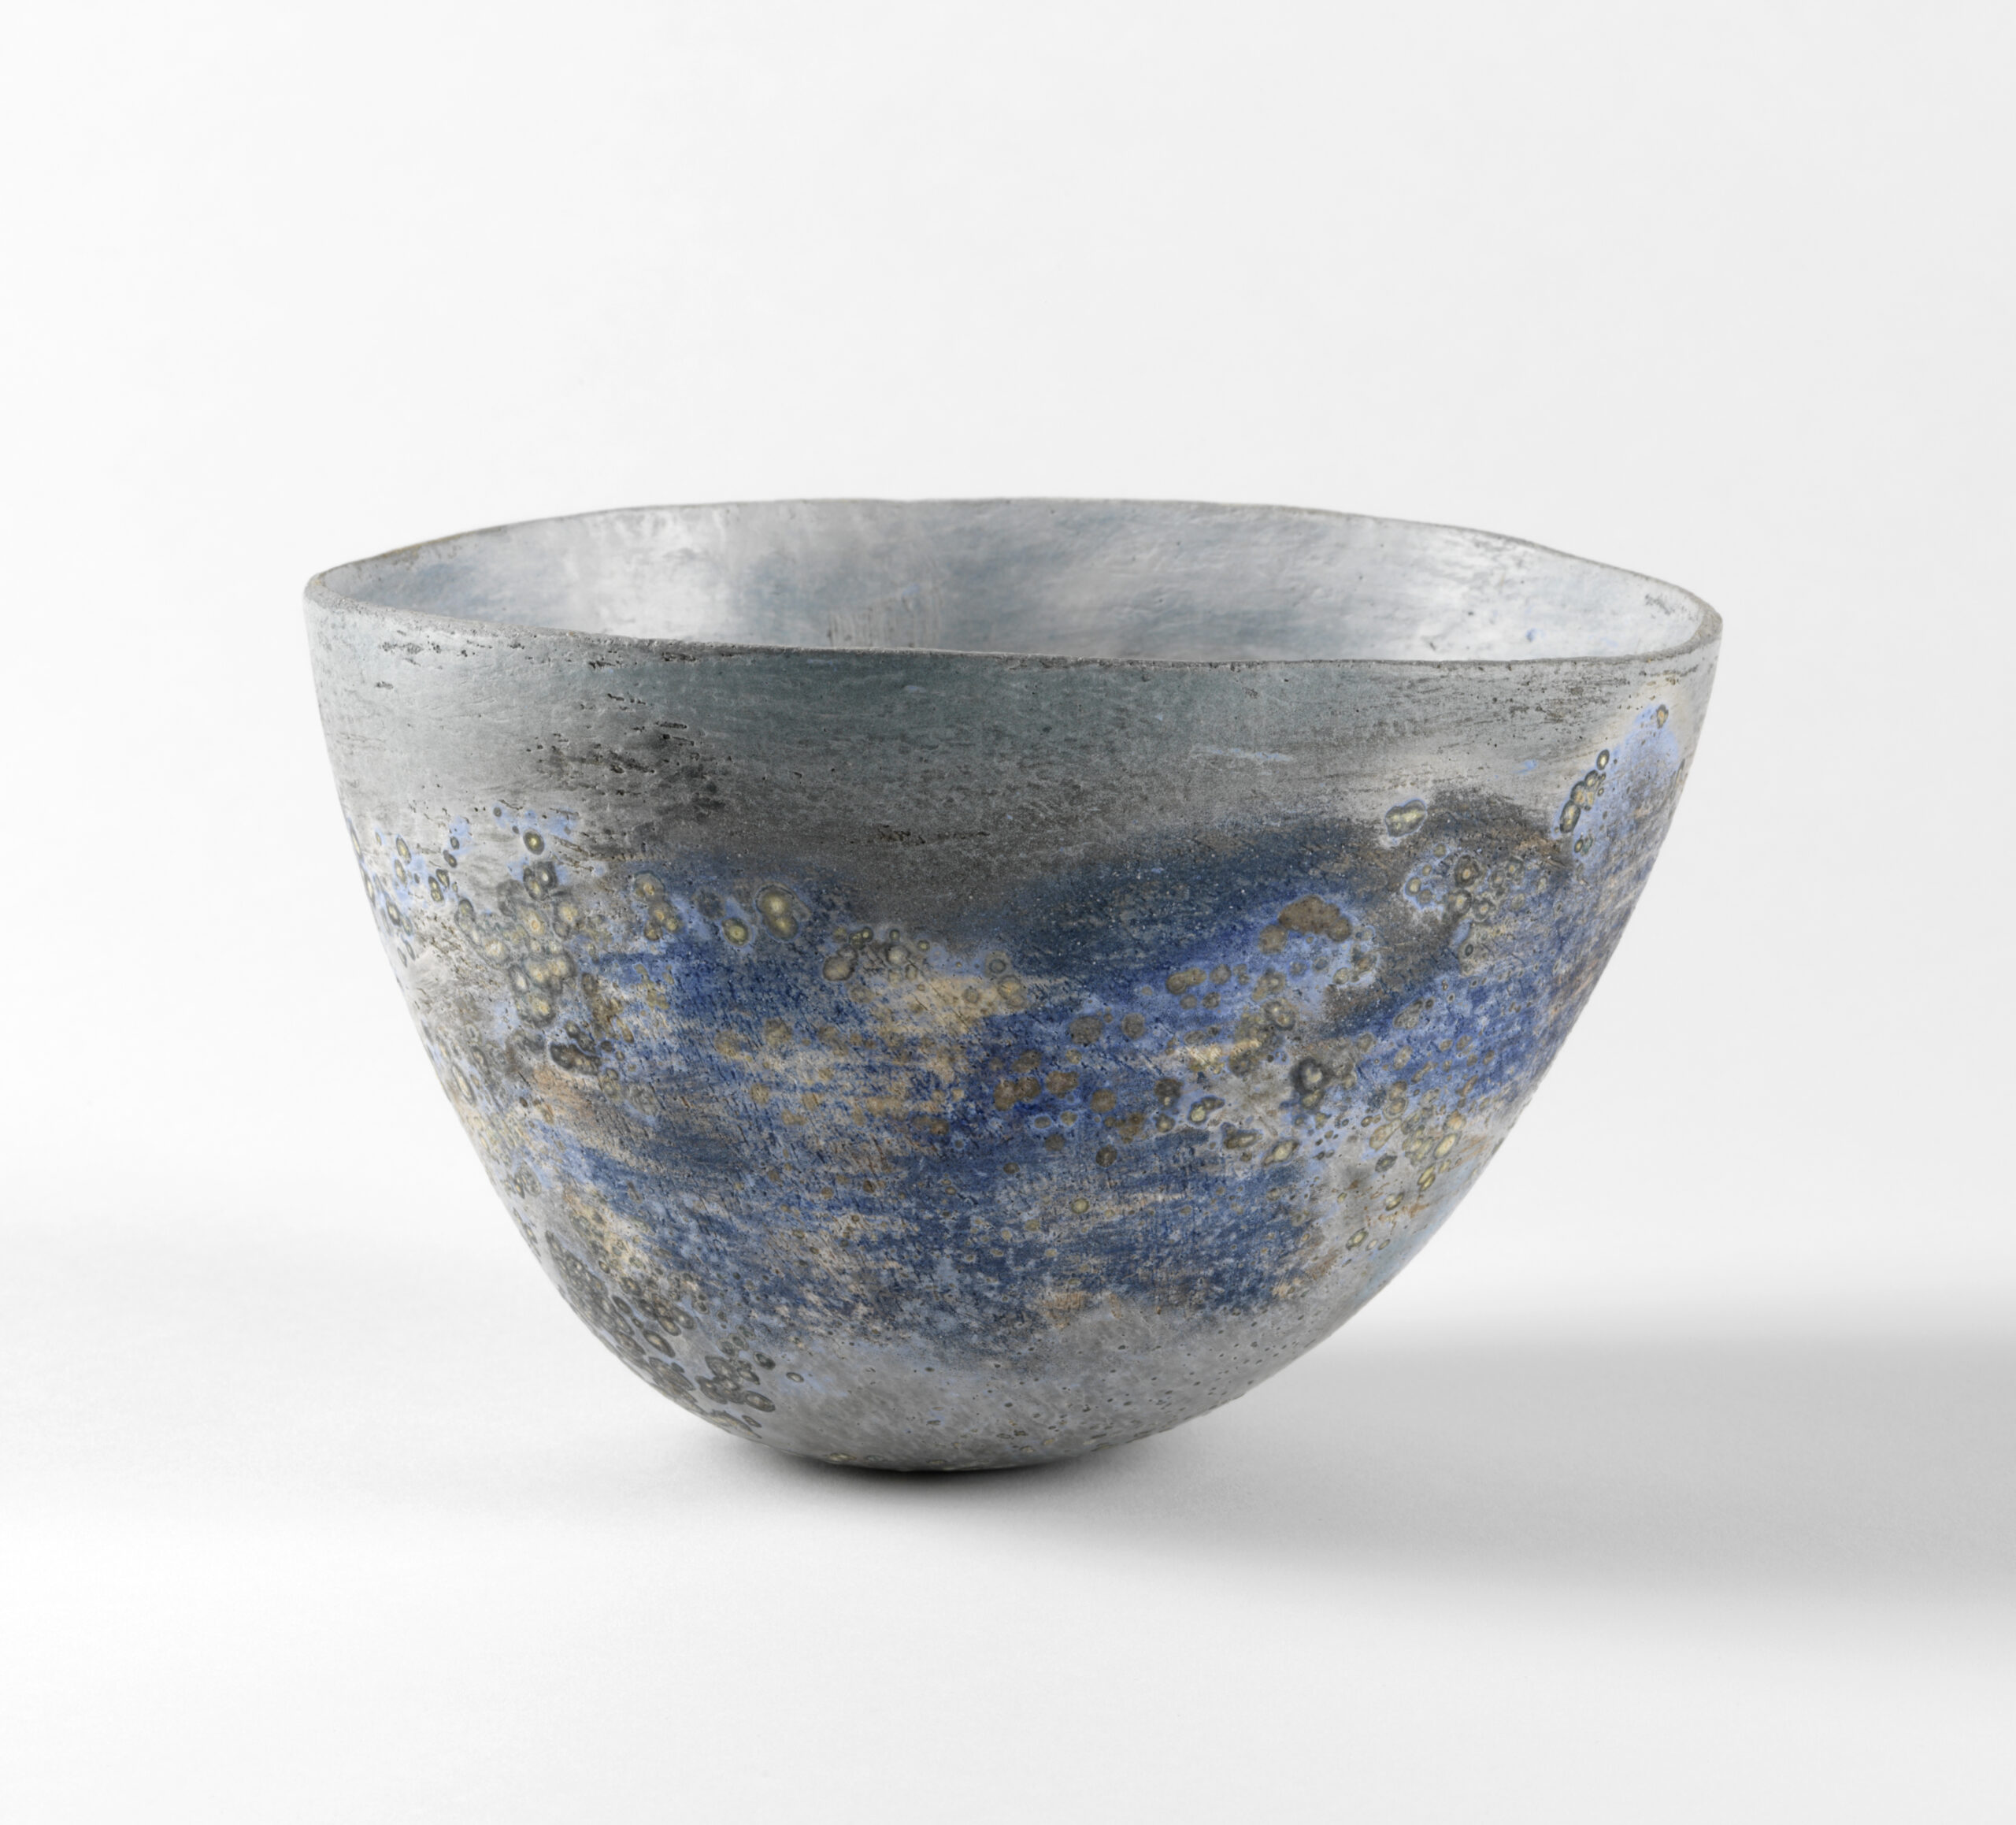 A photograph of a ceramic bowl made by artist Elspeth Owen.